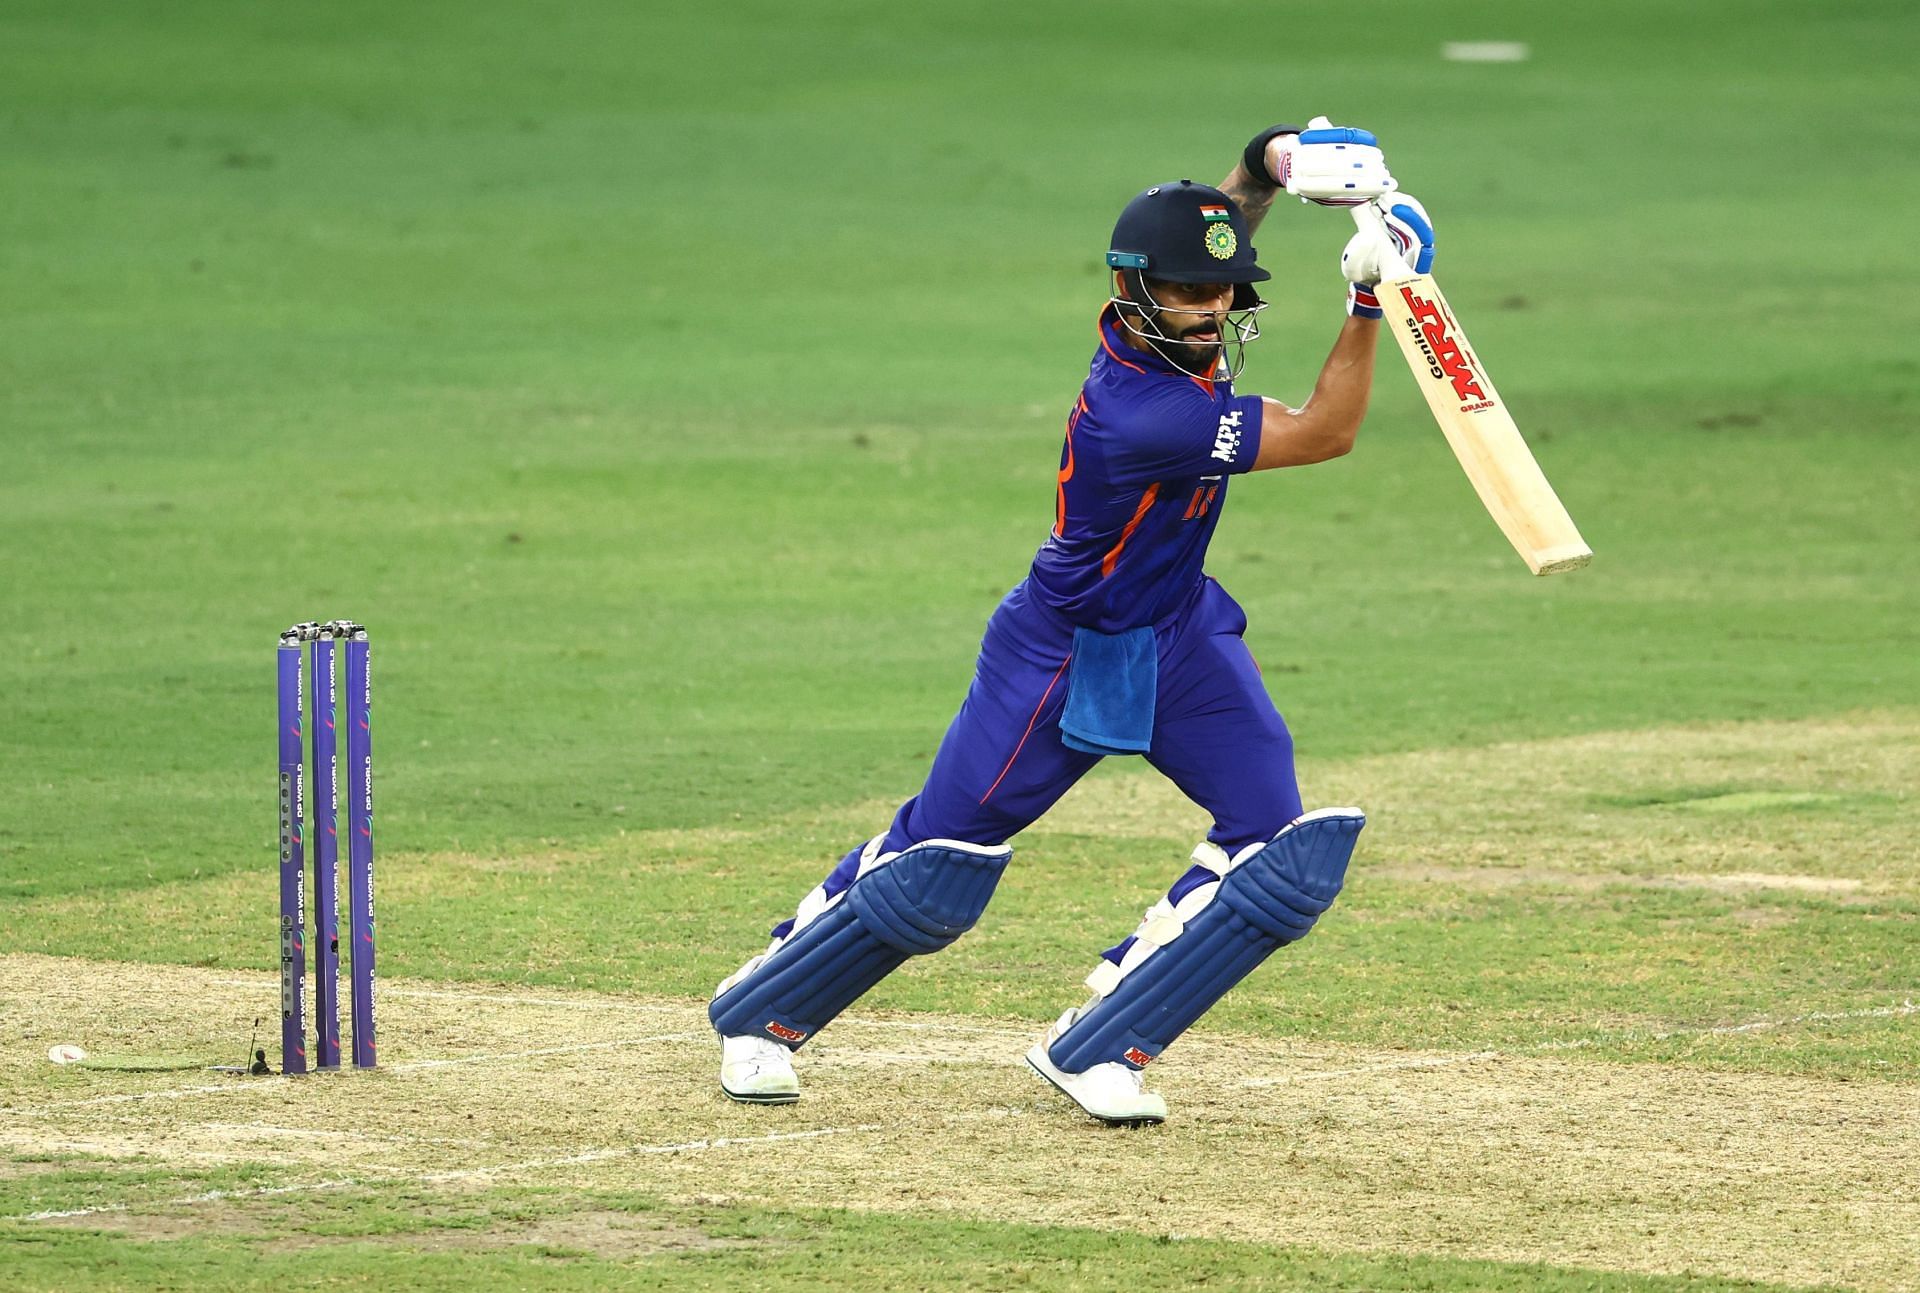 Virat Kohli scored 84 runs through fours and sixes against Afghanistan. (Image: Getty)